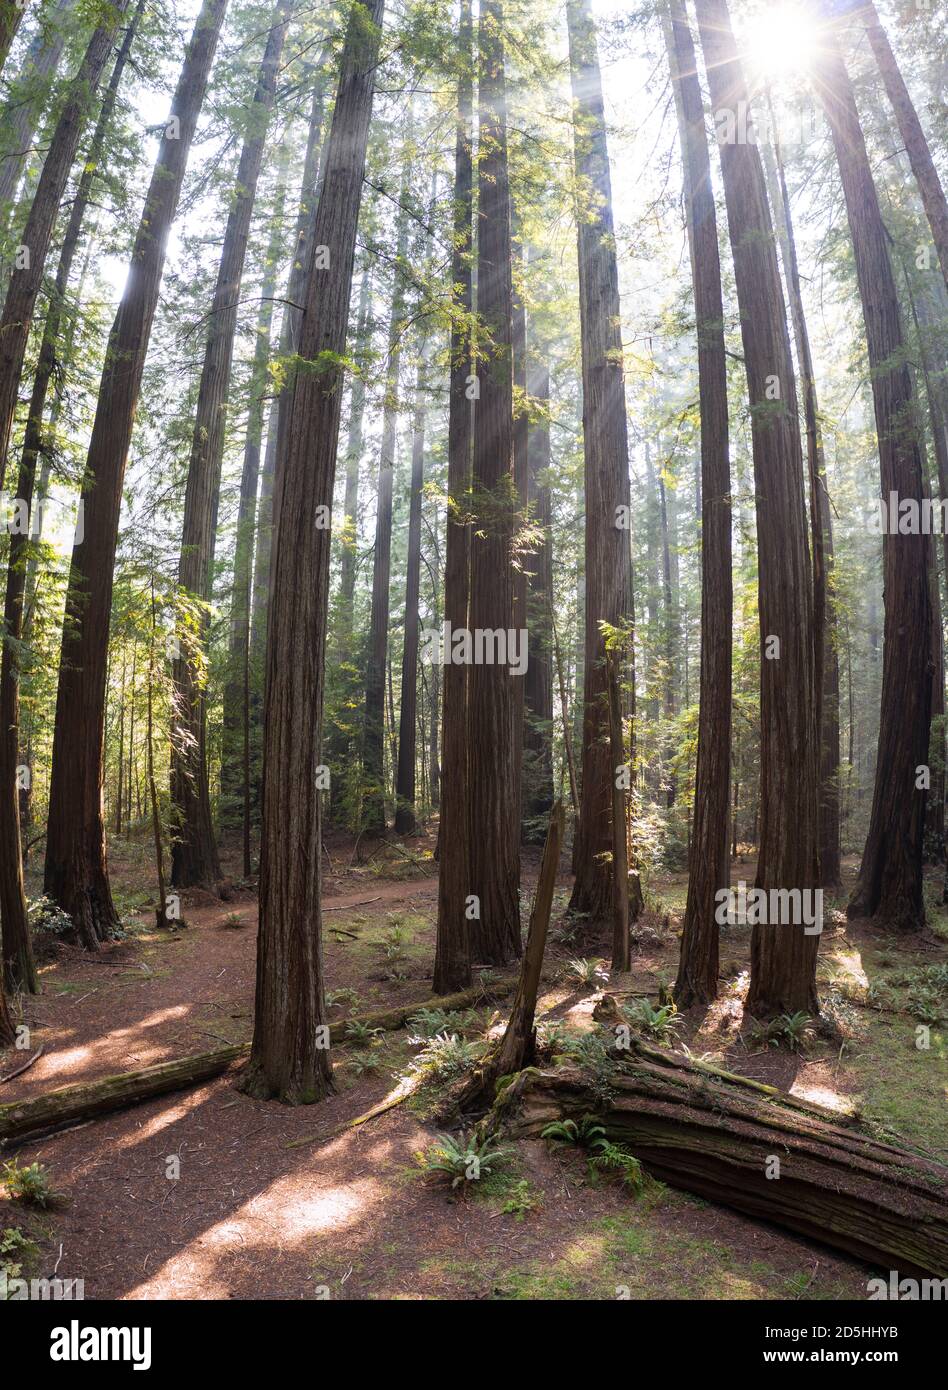 An imposing, old-growth Redwood forest grows in Humboldt, California. Redwood trees, Sequoia sempervirens, are the tallest and most massive tree speci Stock Photo